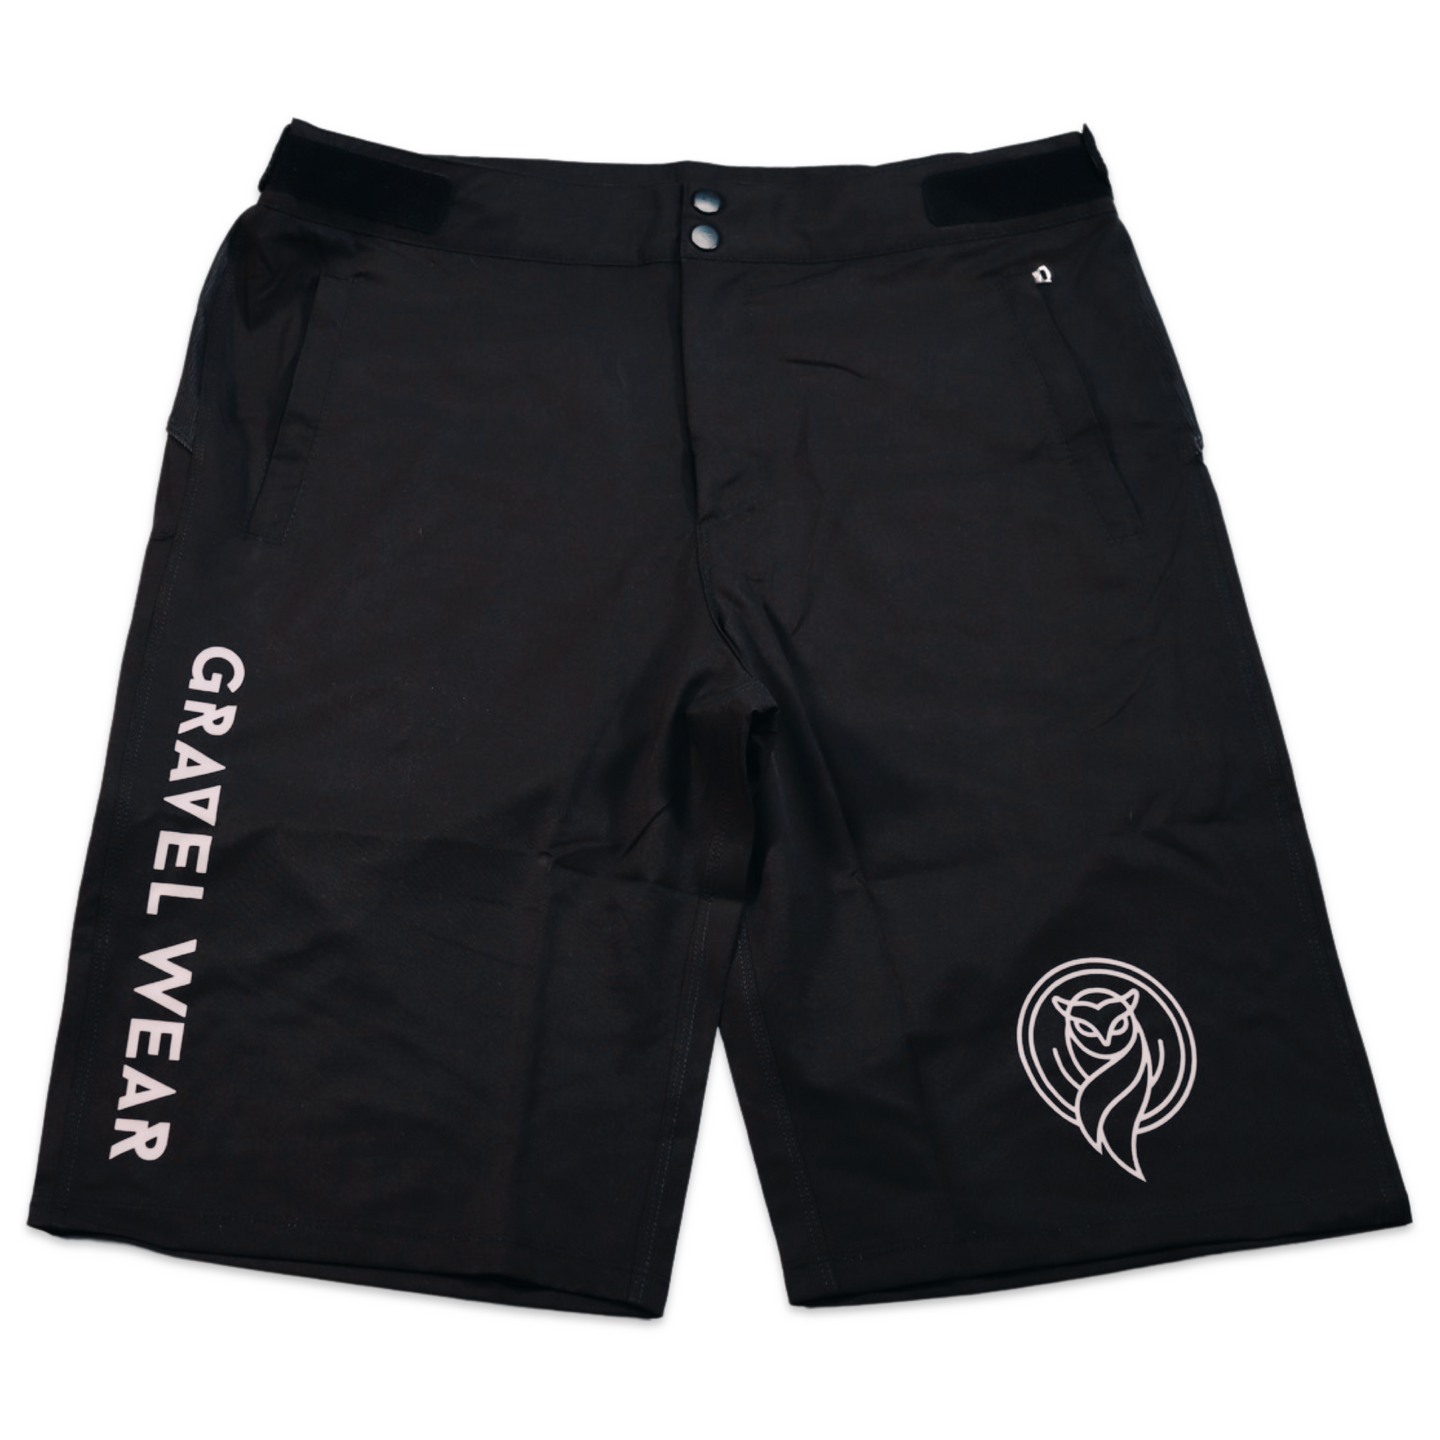 Gravel Ride Shorts Black Front with logo 